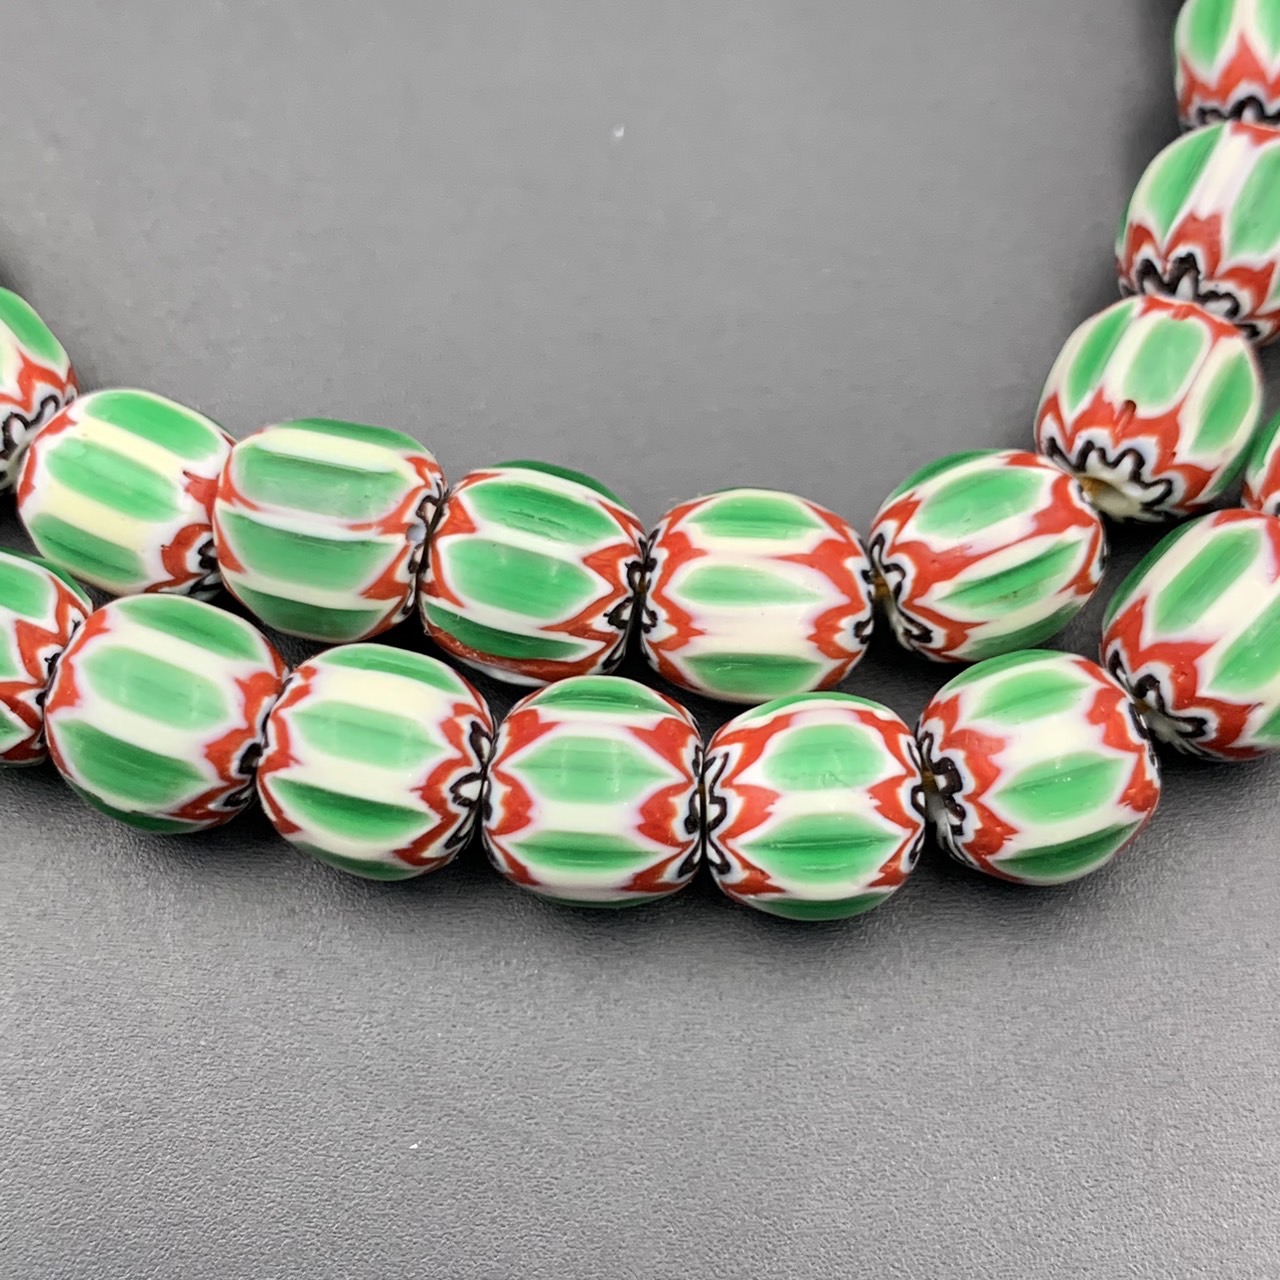 Wonderful Green Vintage Chevron Trade African Glass Beads Strand, LPBR-0322 - Image 5 of 8